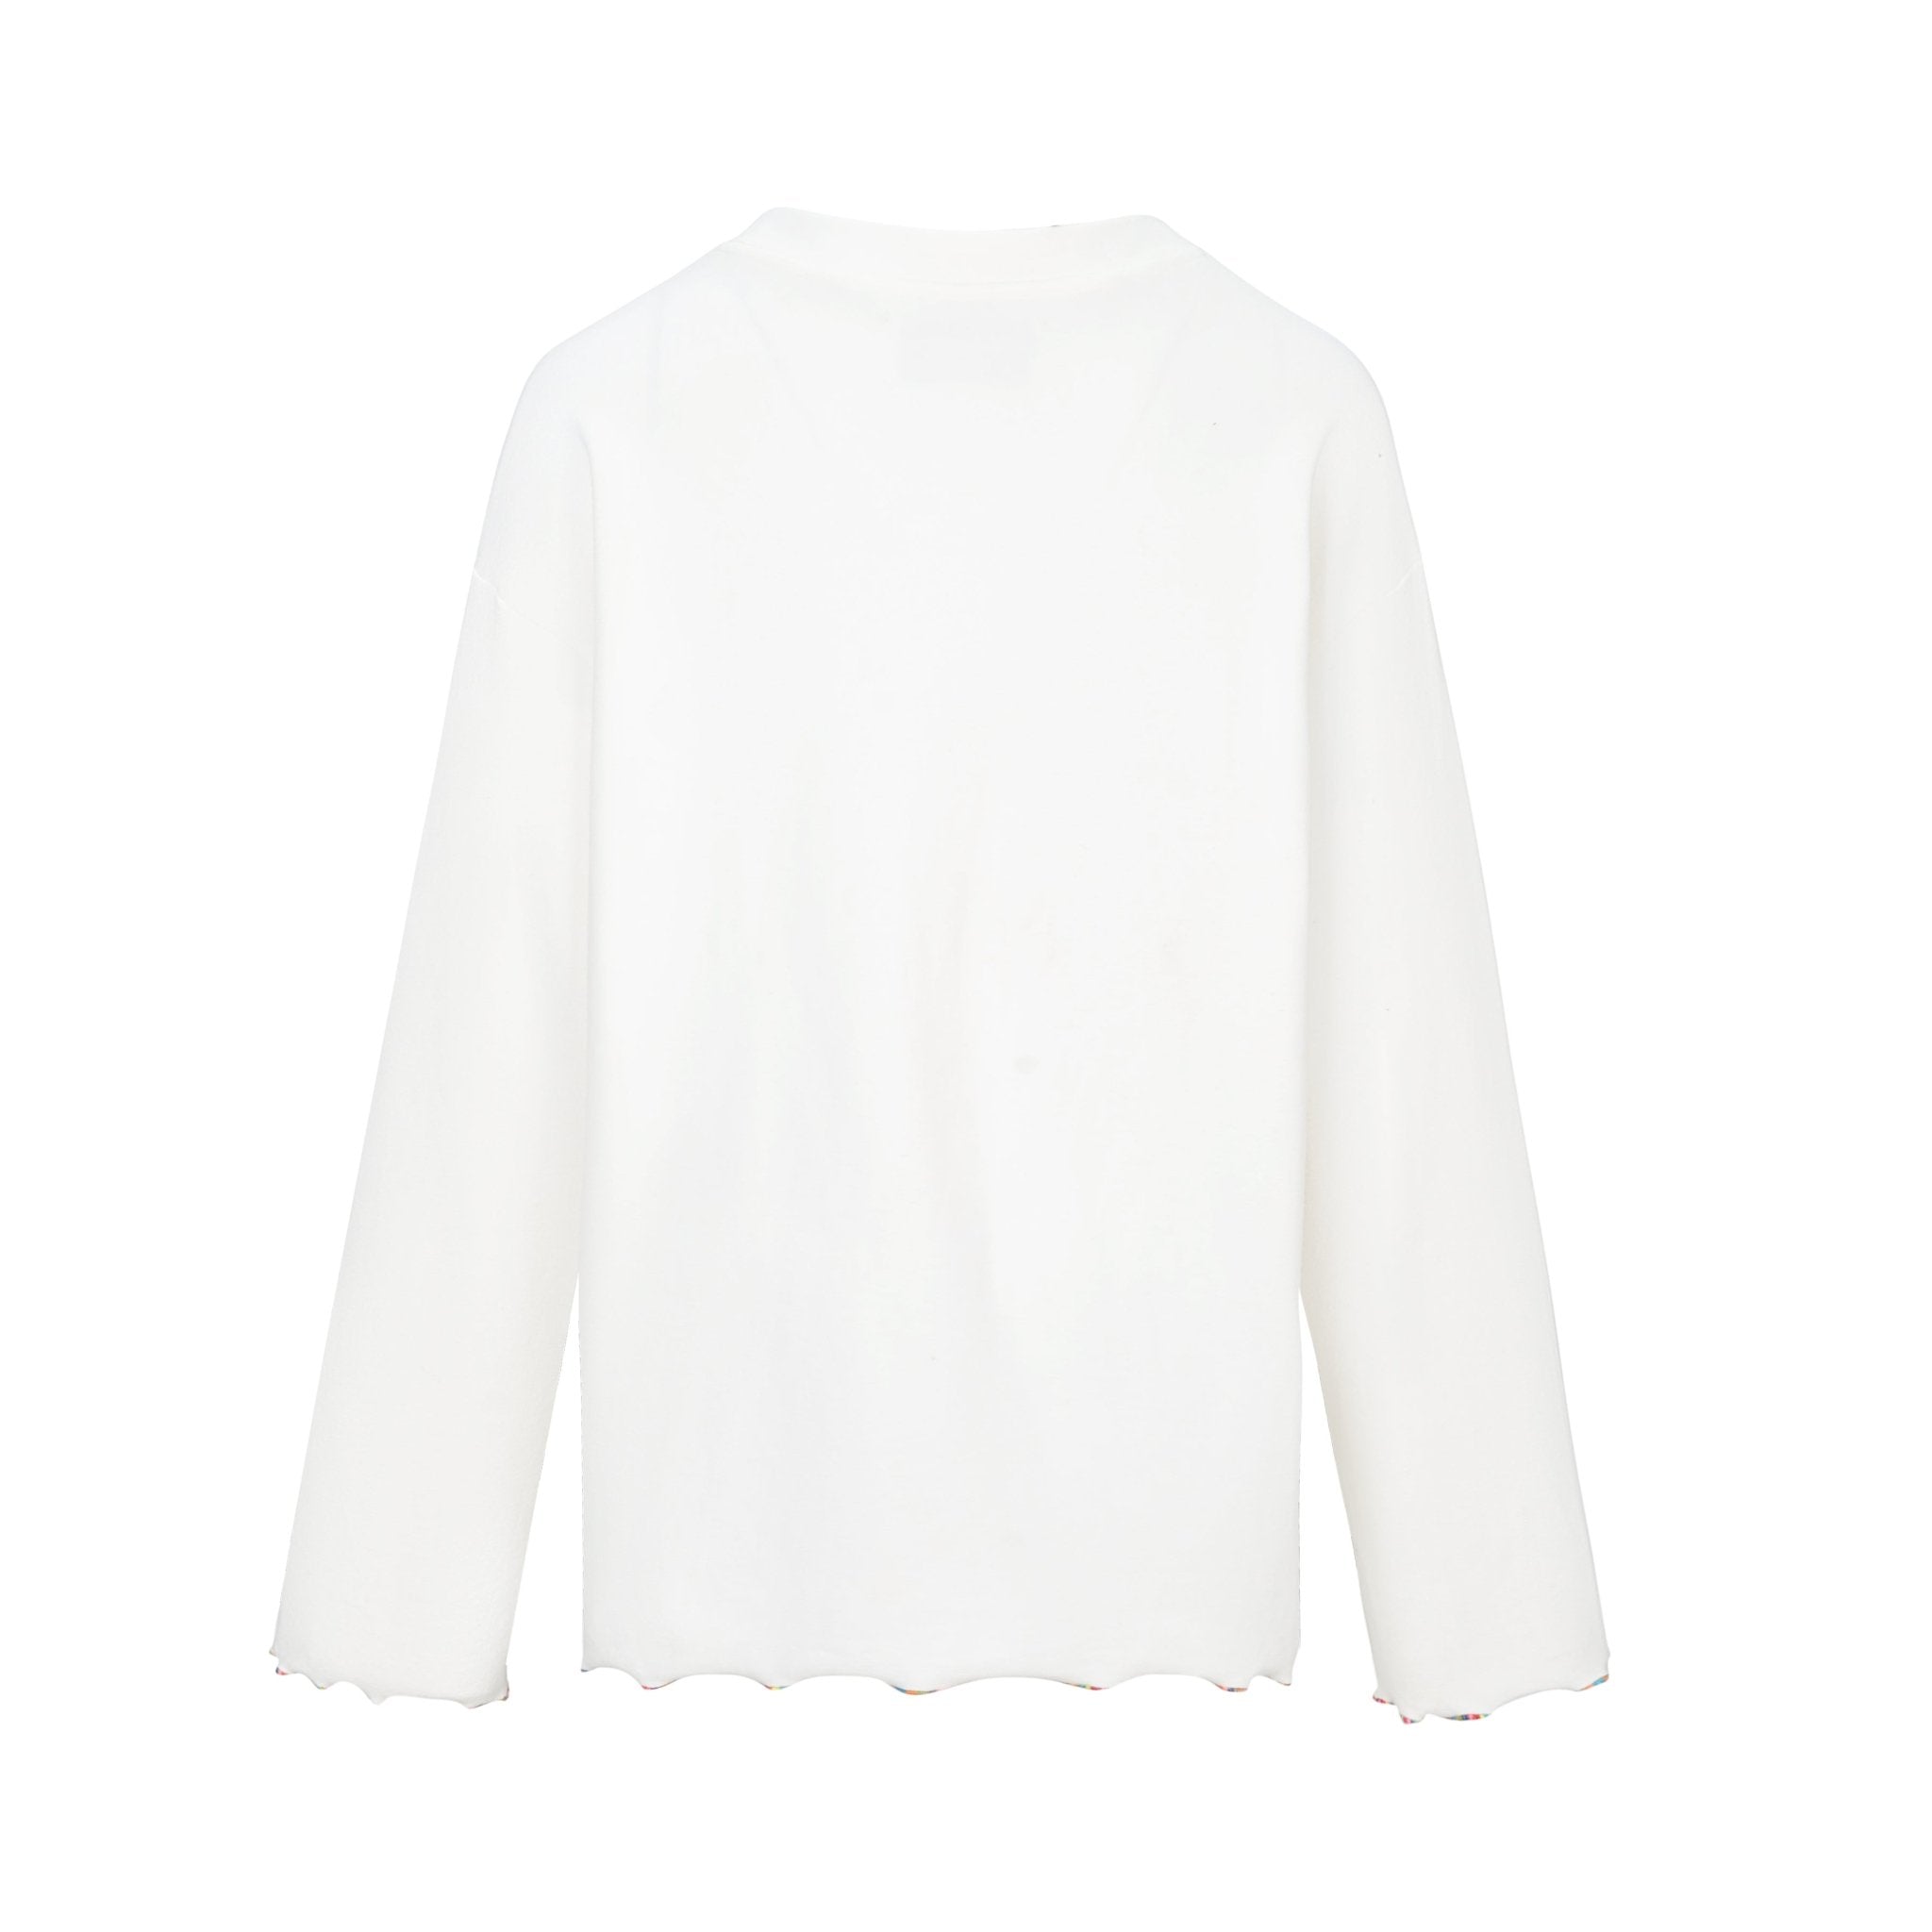 NOSENSE White Brand Name Color Embroidery Long Sleeve | MADA IN CHINA